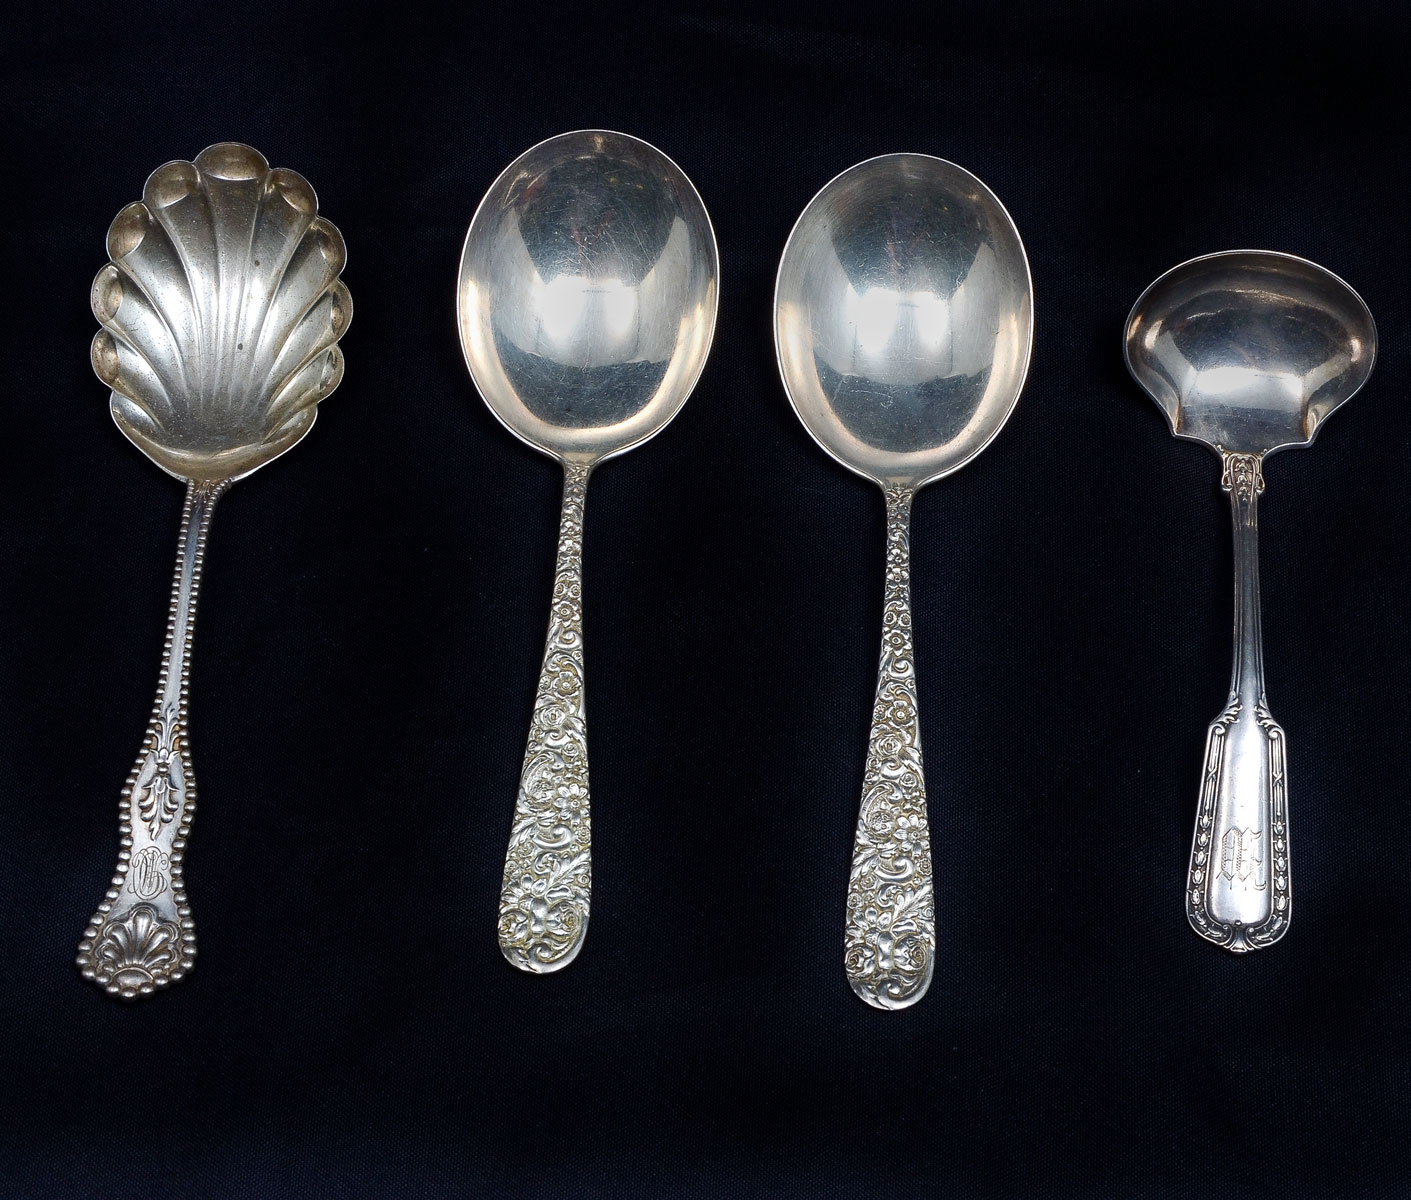 4 PC. STERLING LADLES & SPOONS: